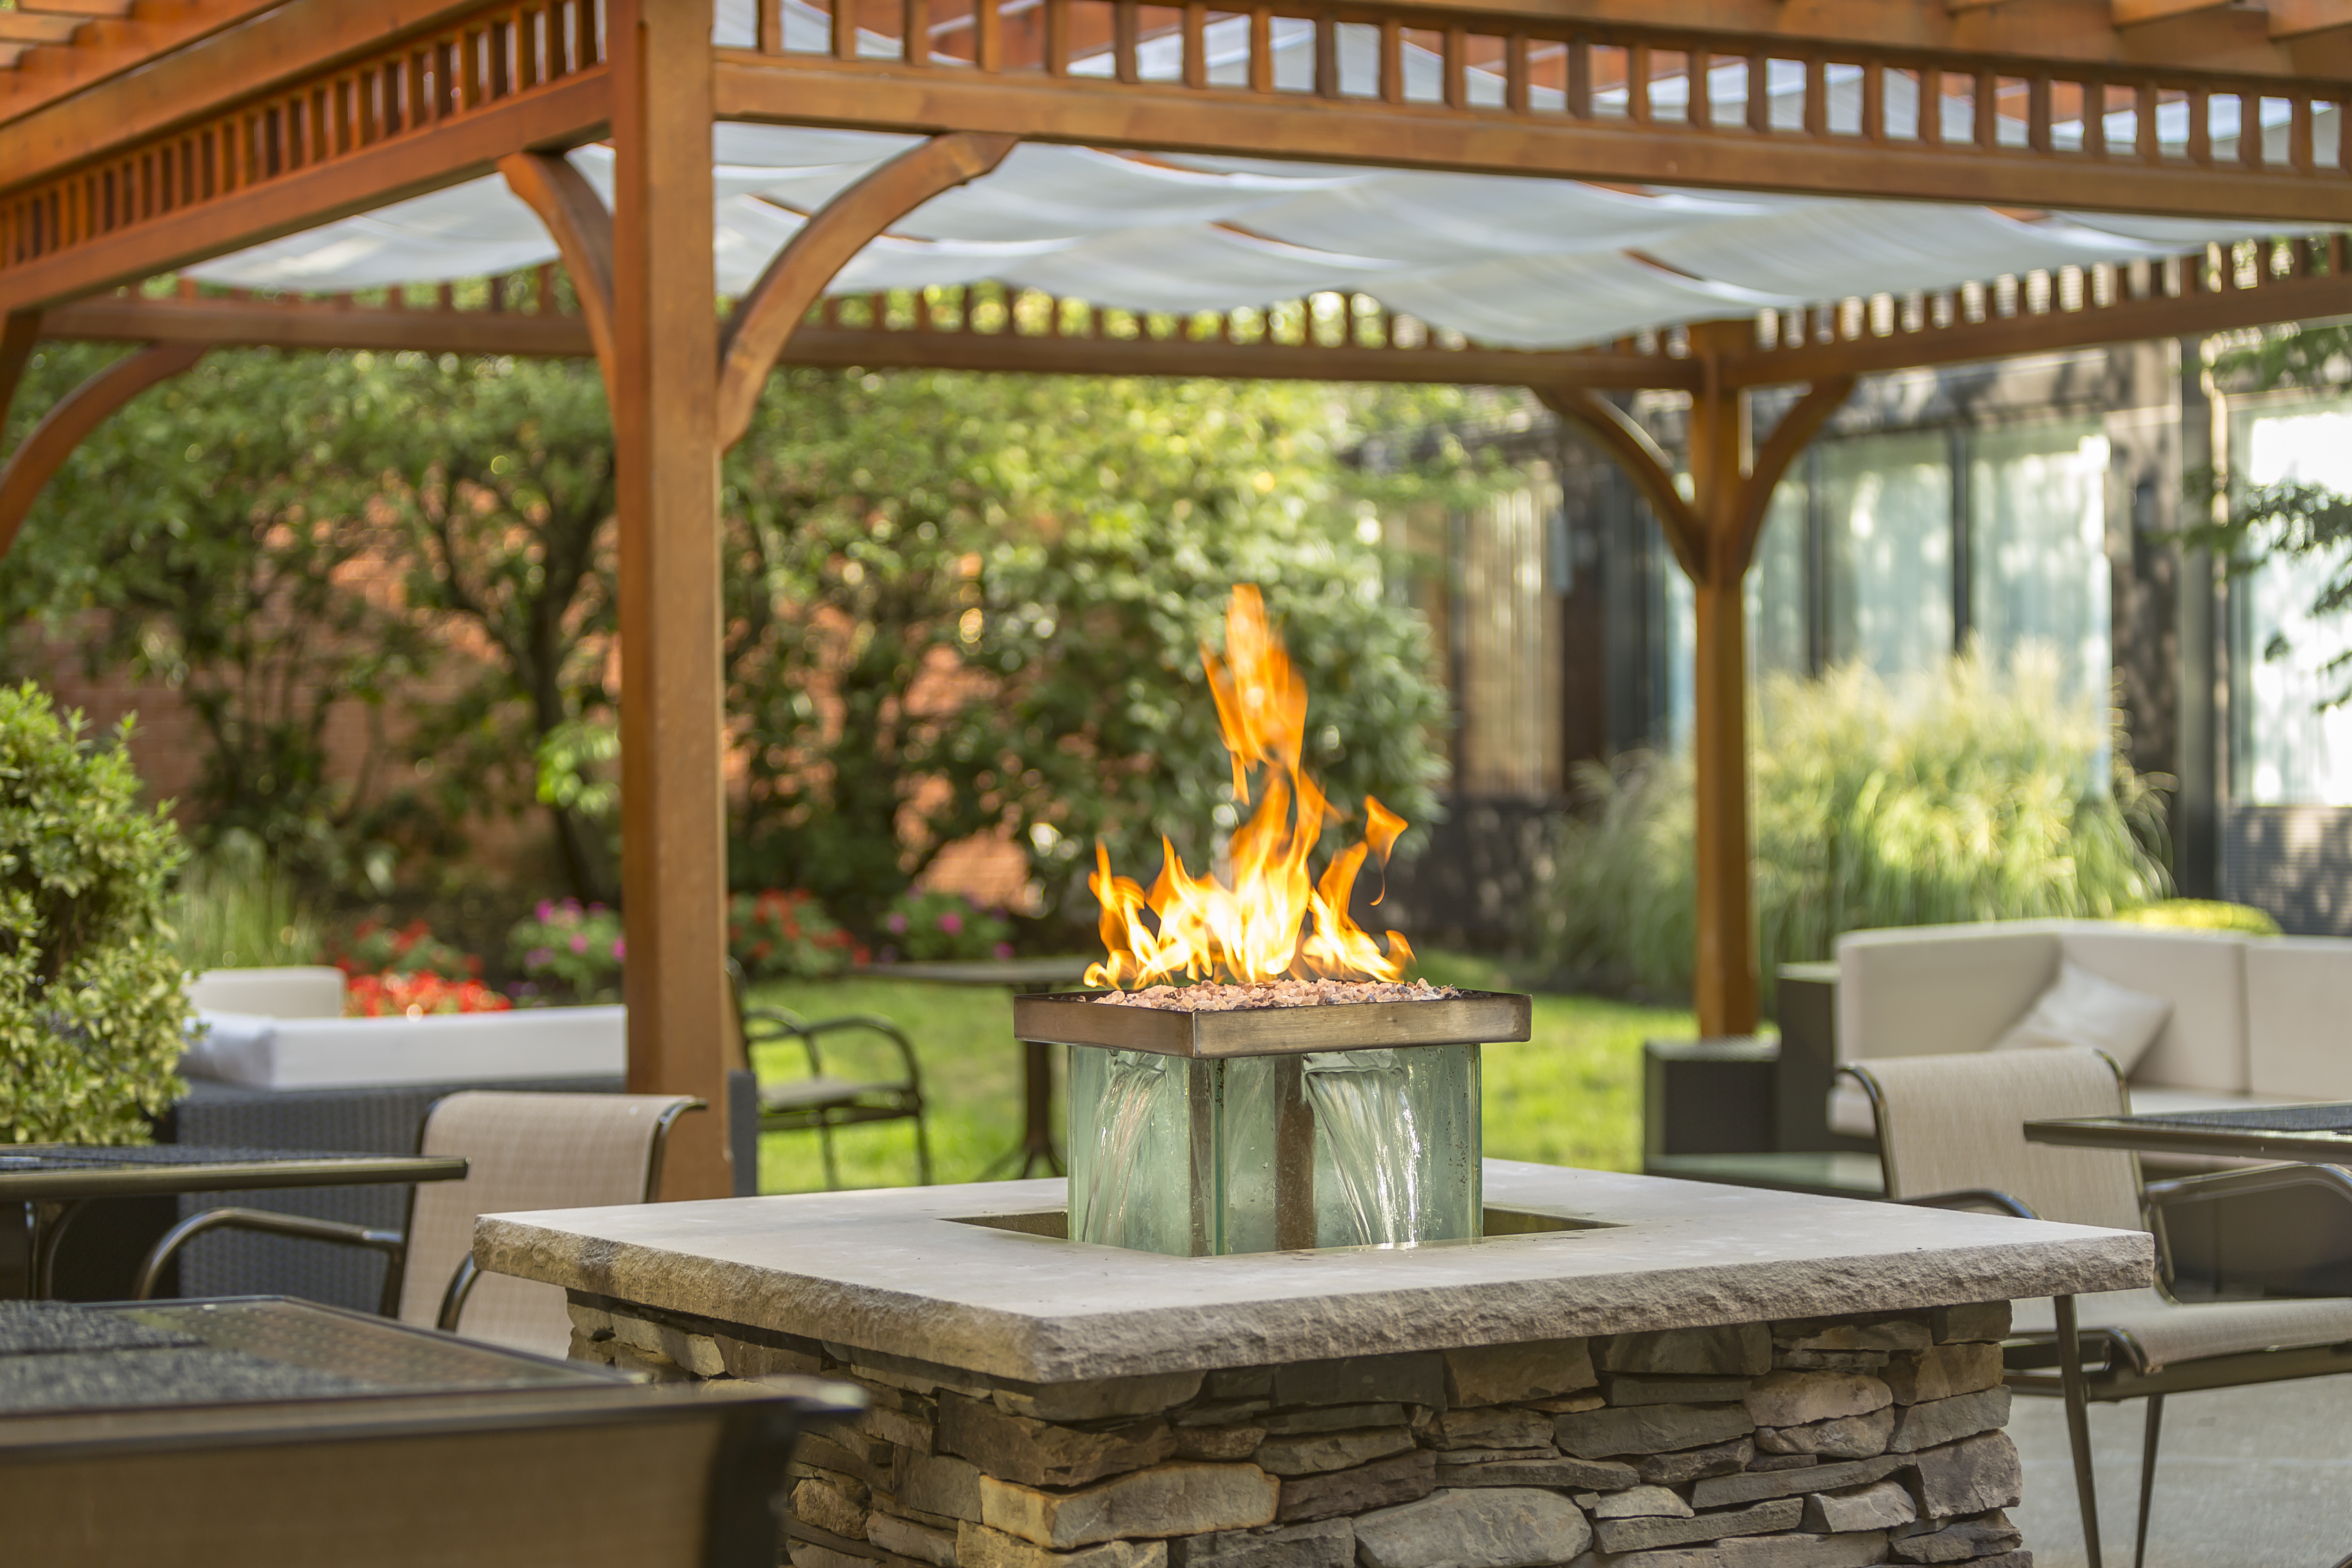 Tables and Chairs Under Pavilion Around Fire Pit on Hotel Exterior Patio